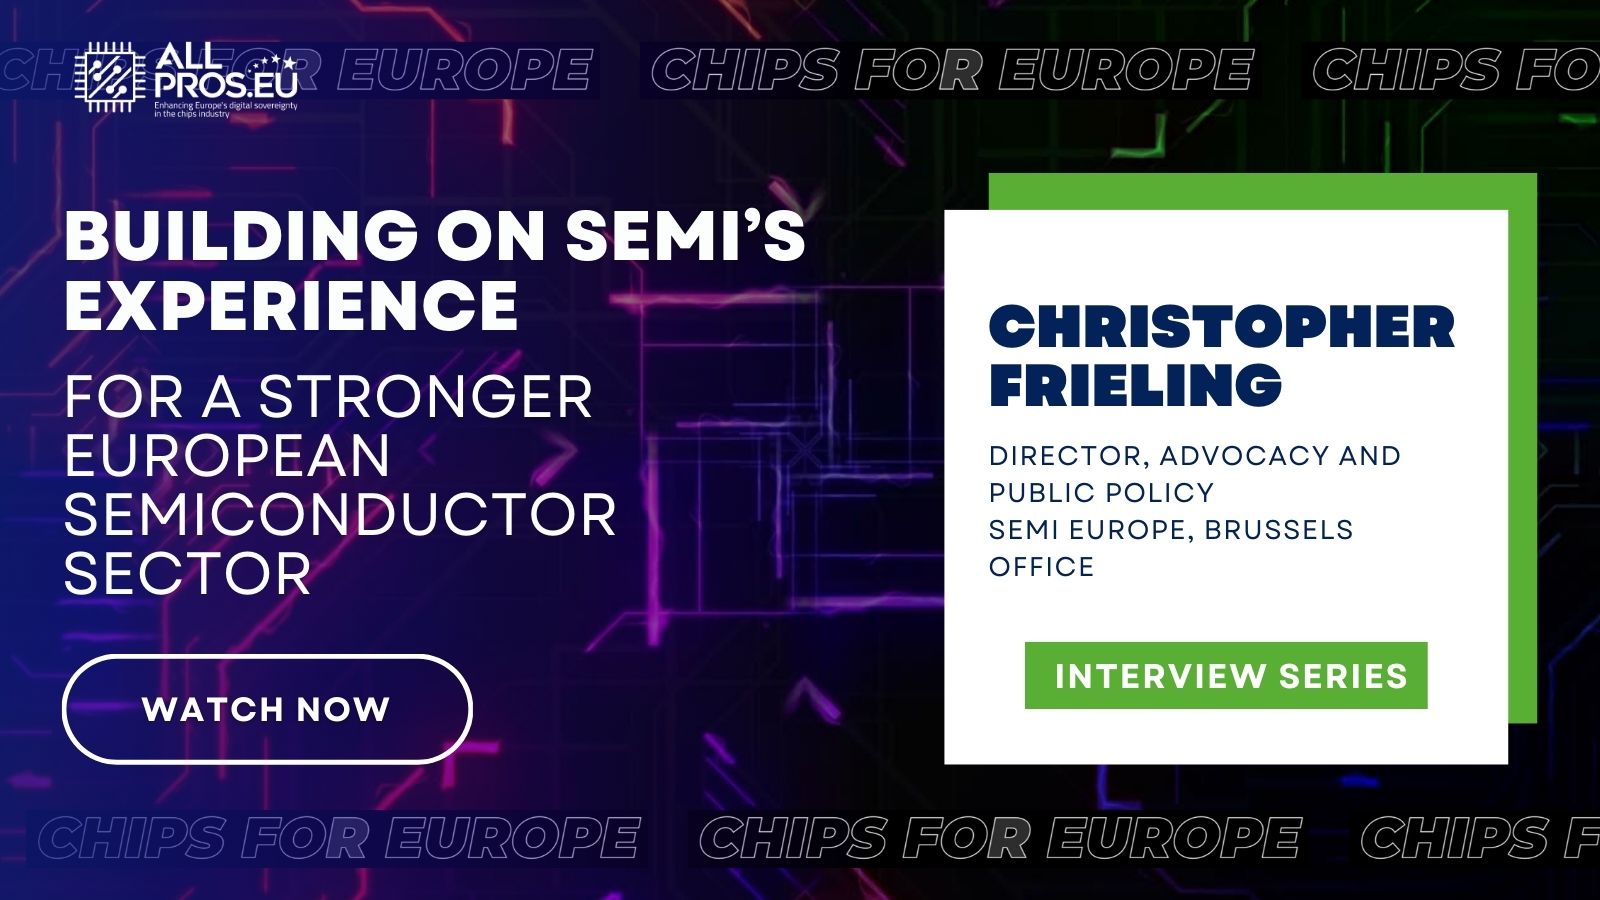 Interview with Christopher Frieling, Director at SEMI Europe